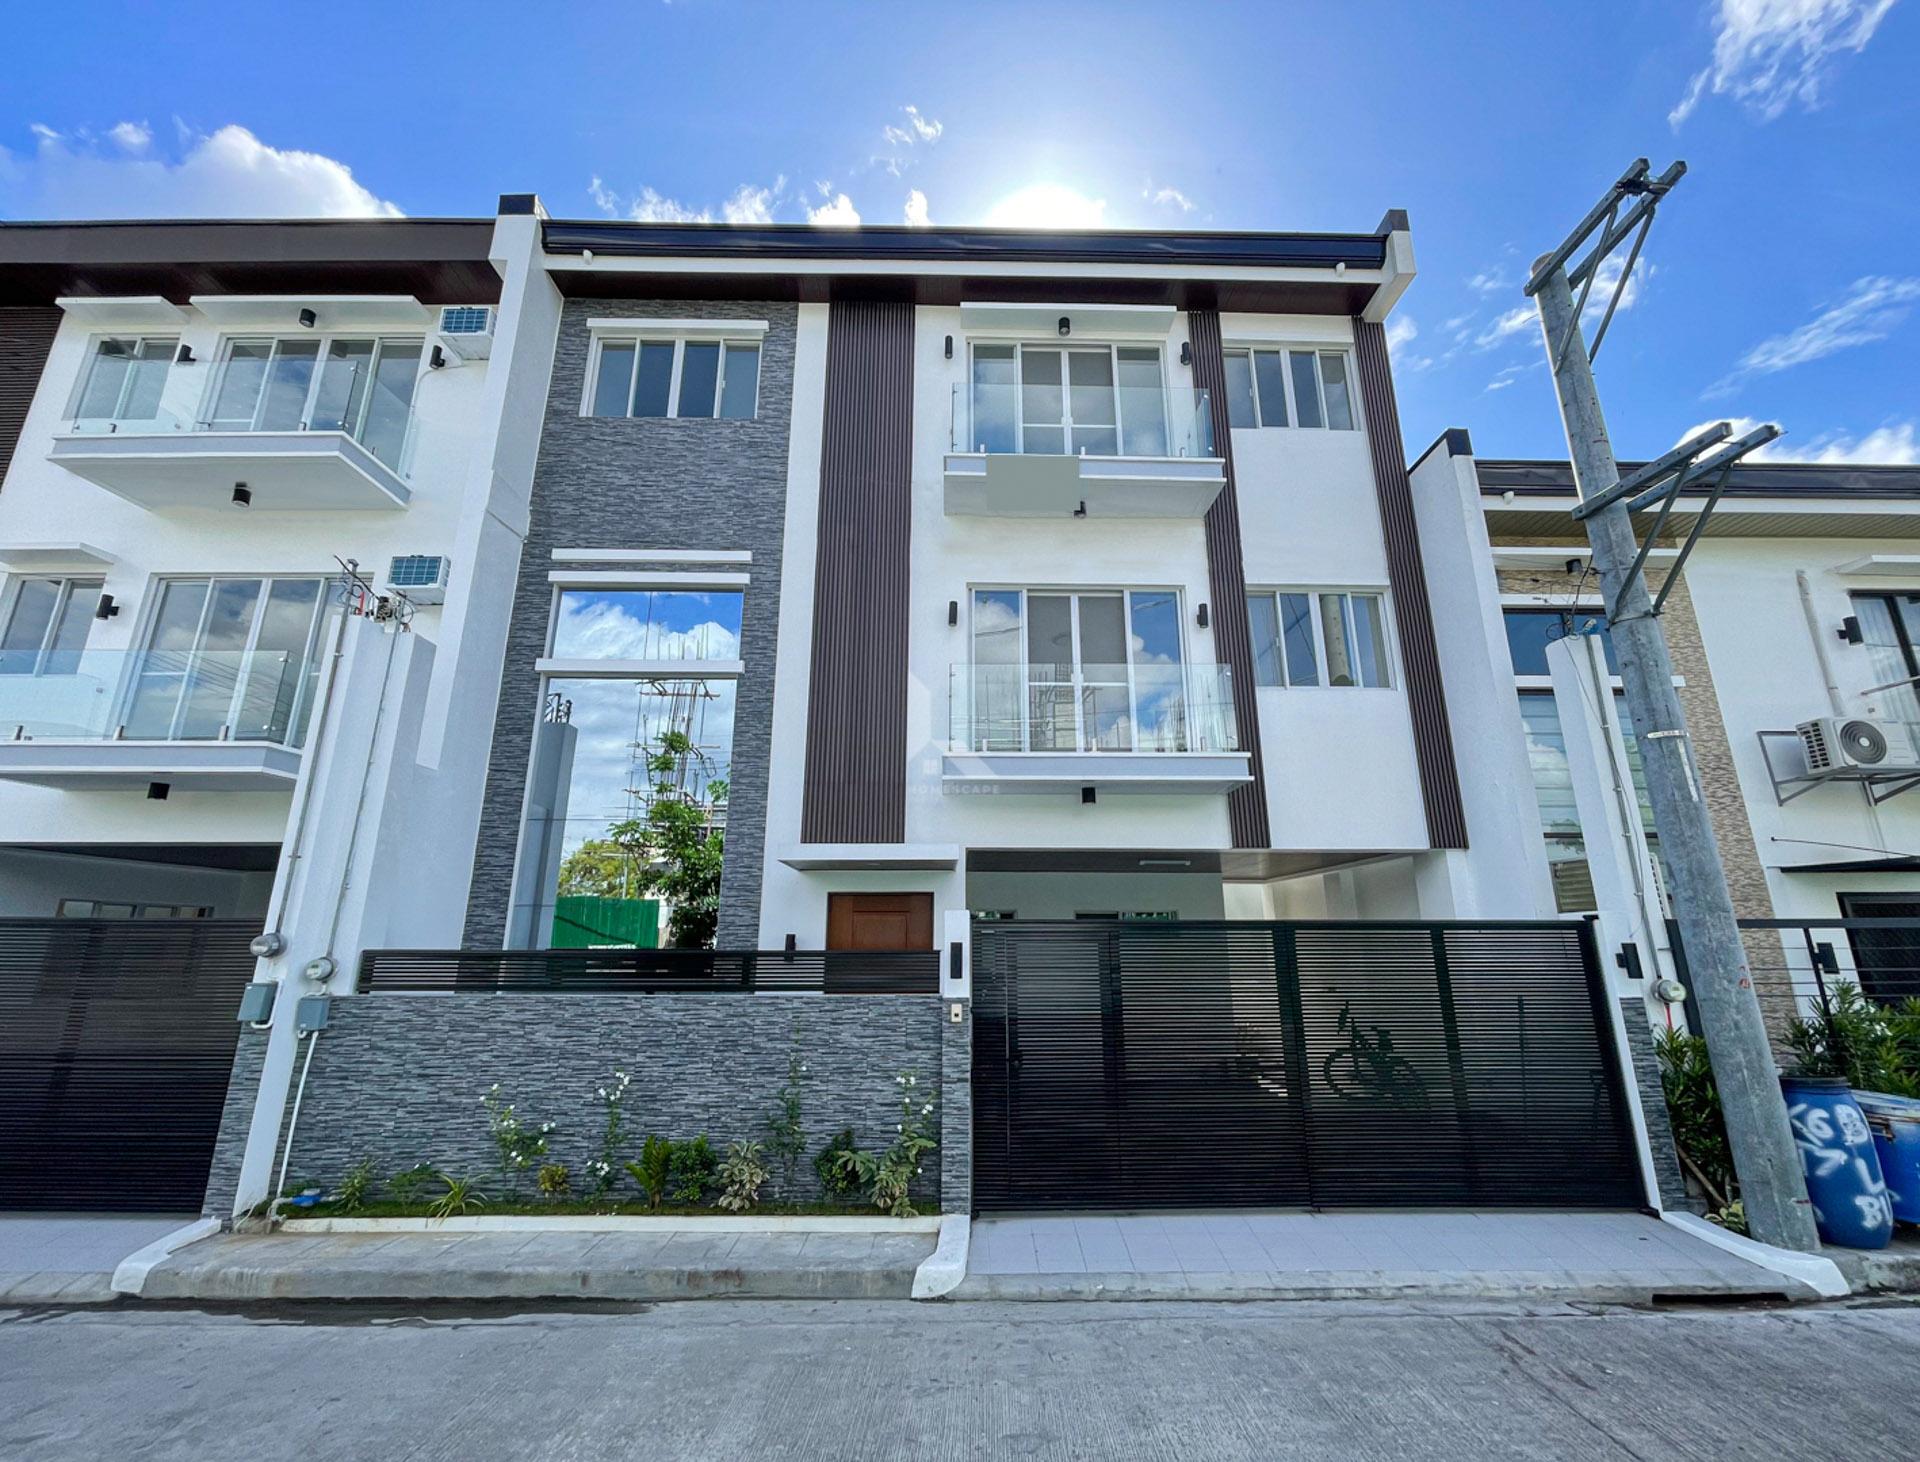 Pleasing Modern Contemporary House For Sale in Greenwoods Executive Village, Pasig City